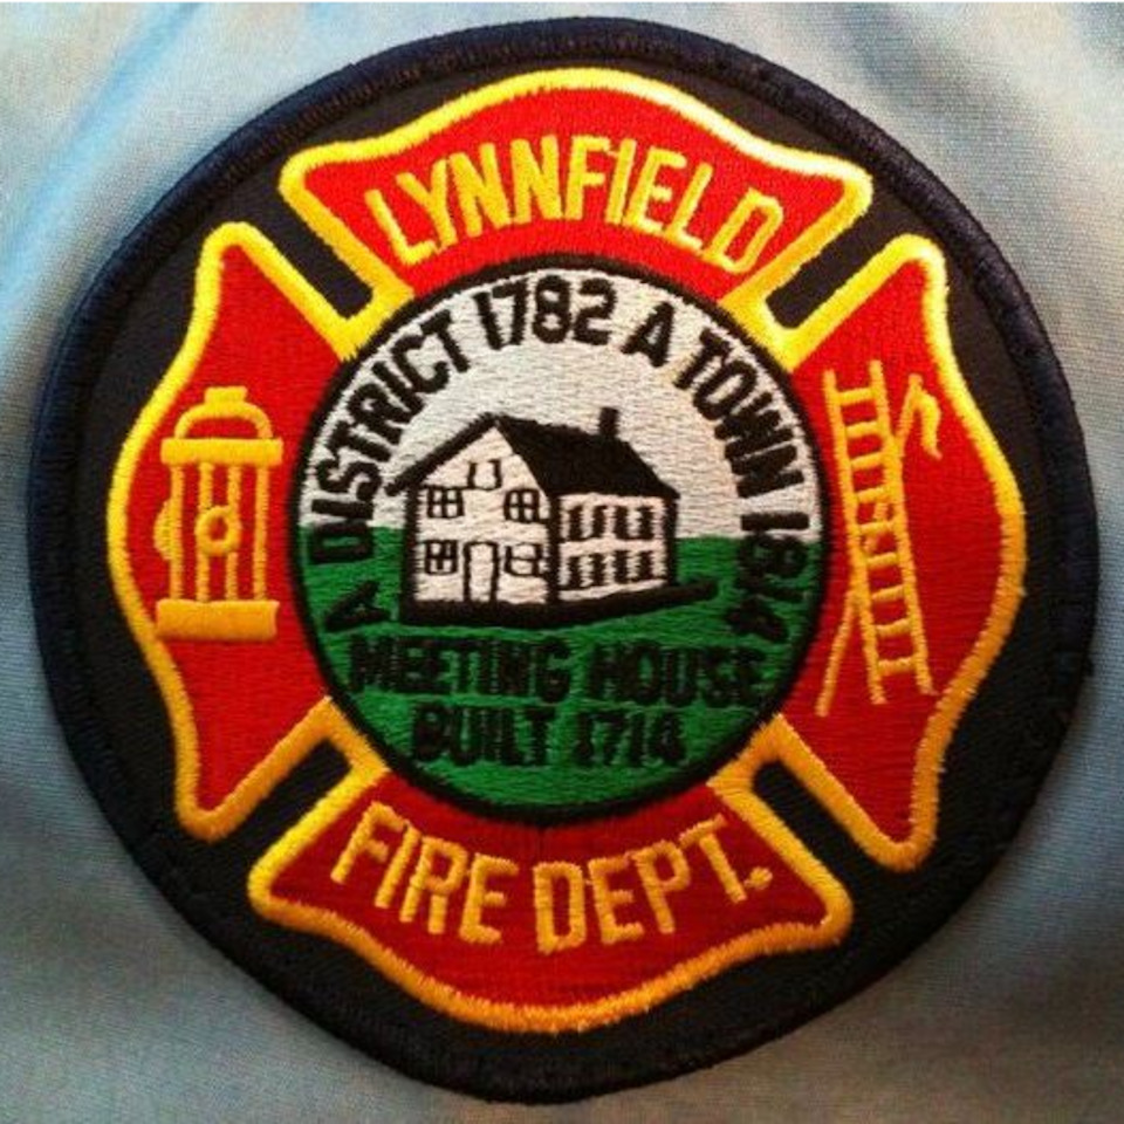 Completely Nude Lynnfield Firefighter Bought Soda At 7-11 